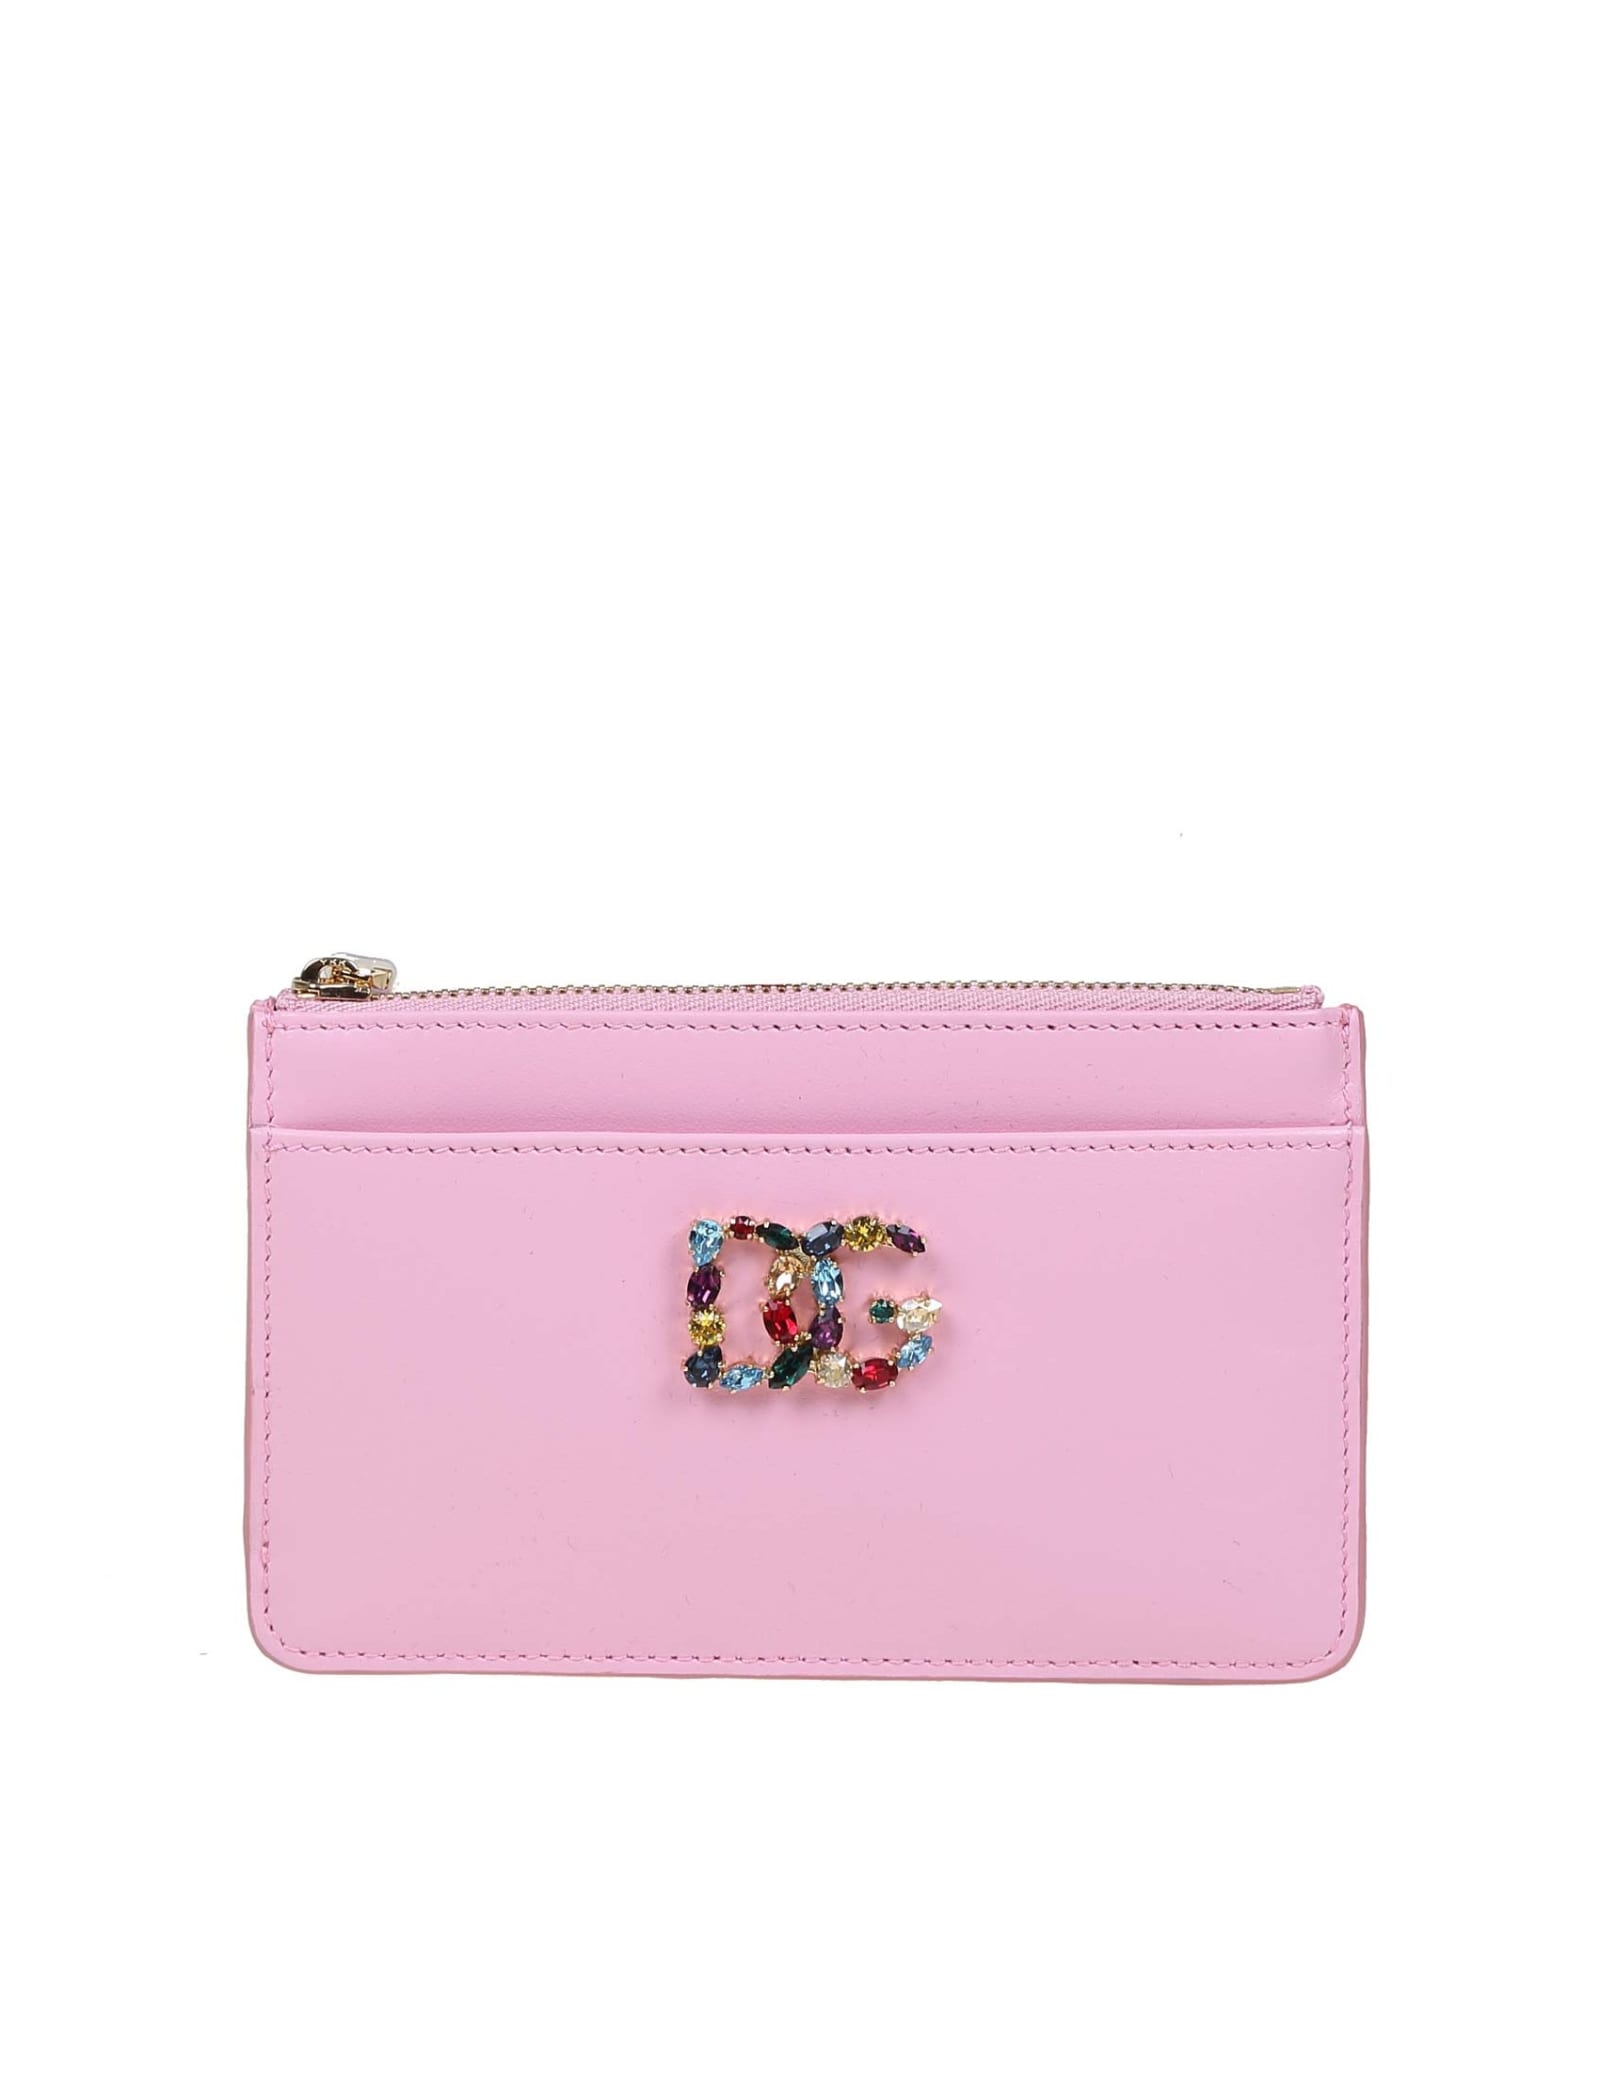 Dolce & Gabbana Card Holder In Pink Color Leather